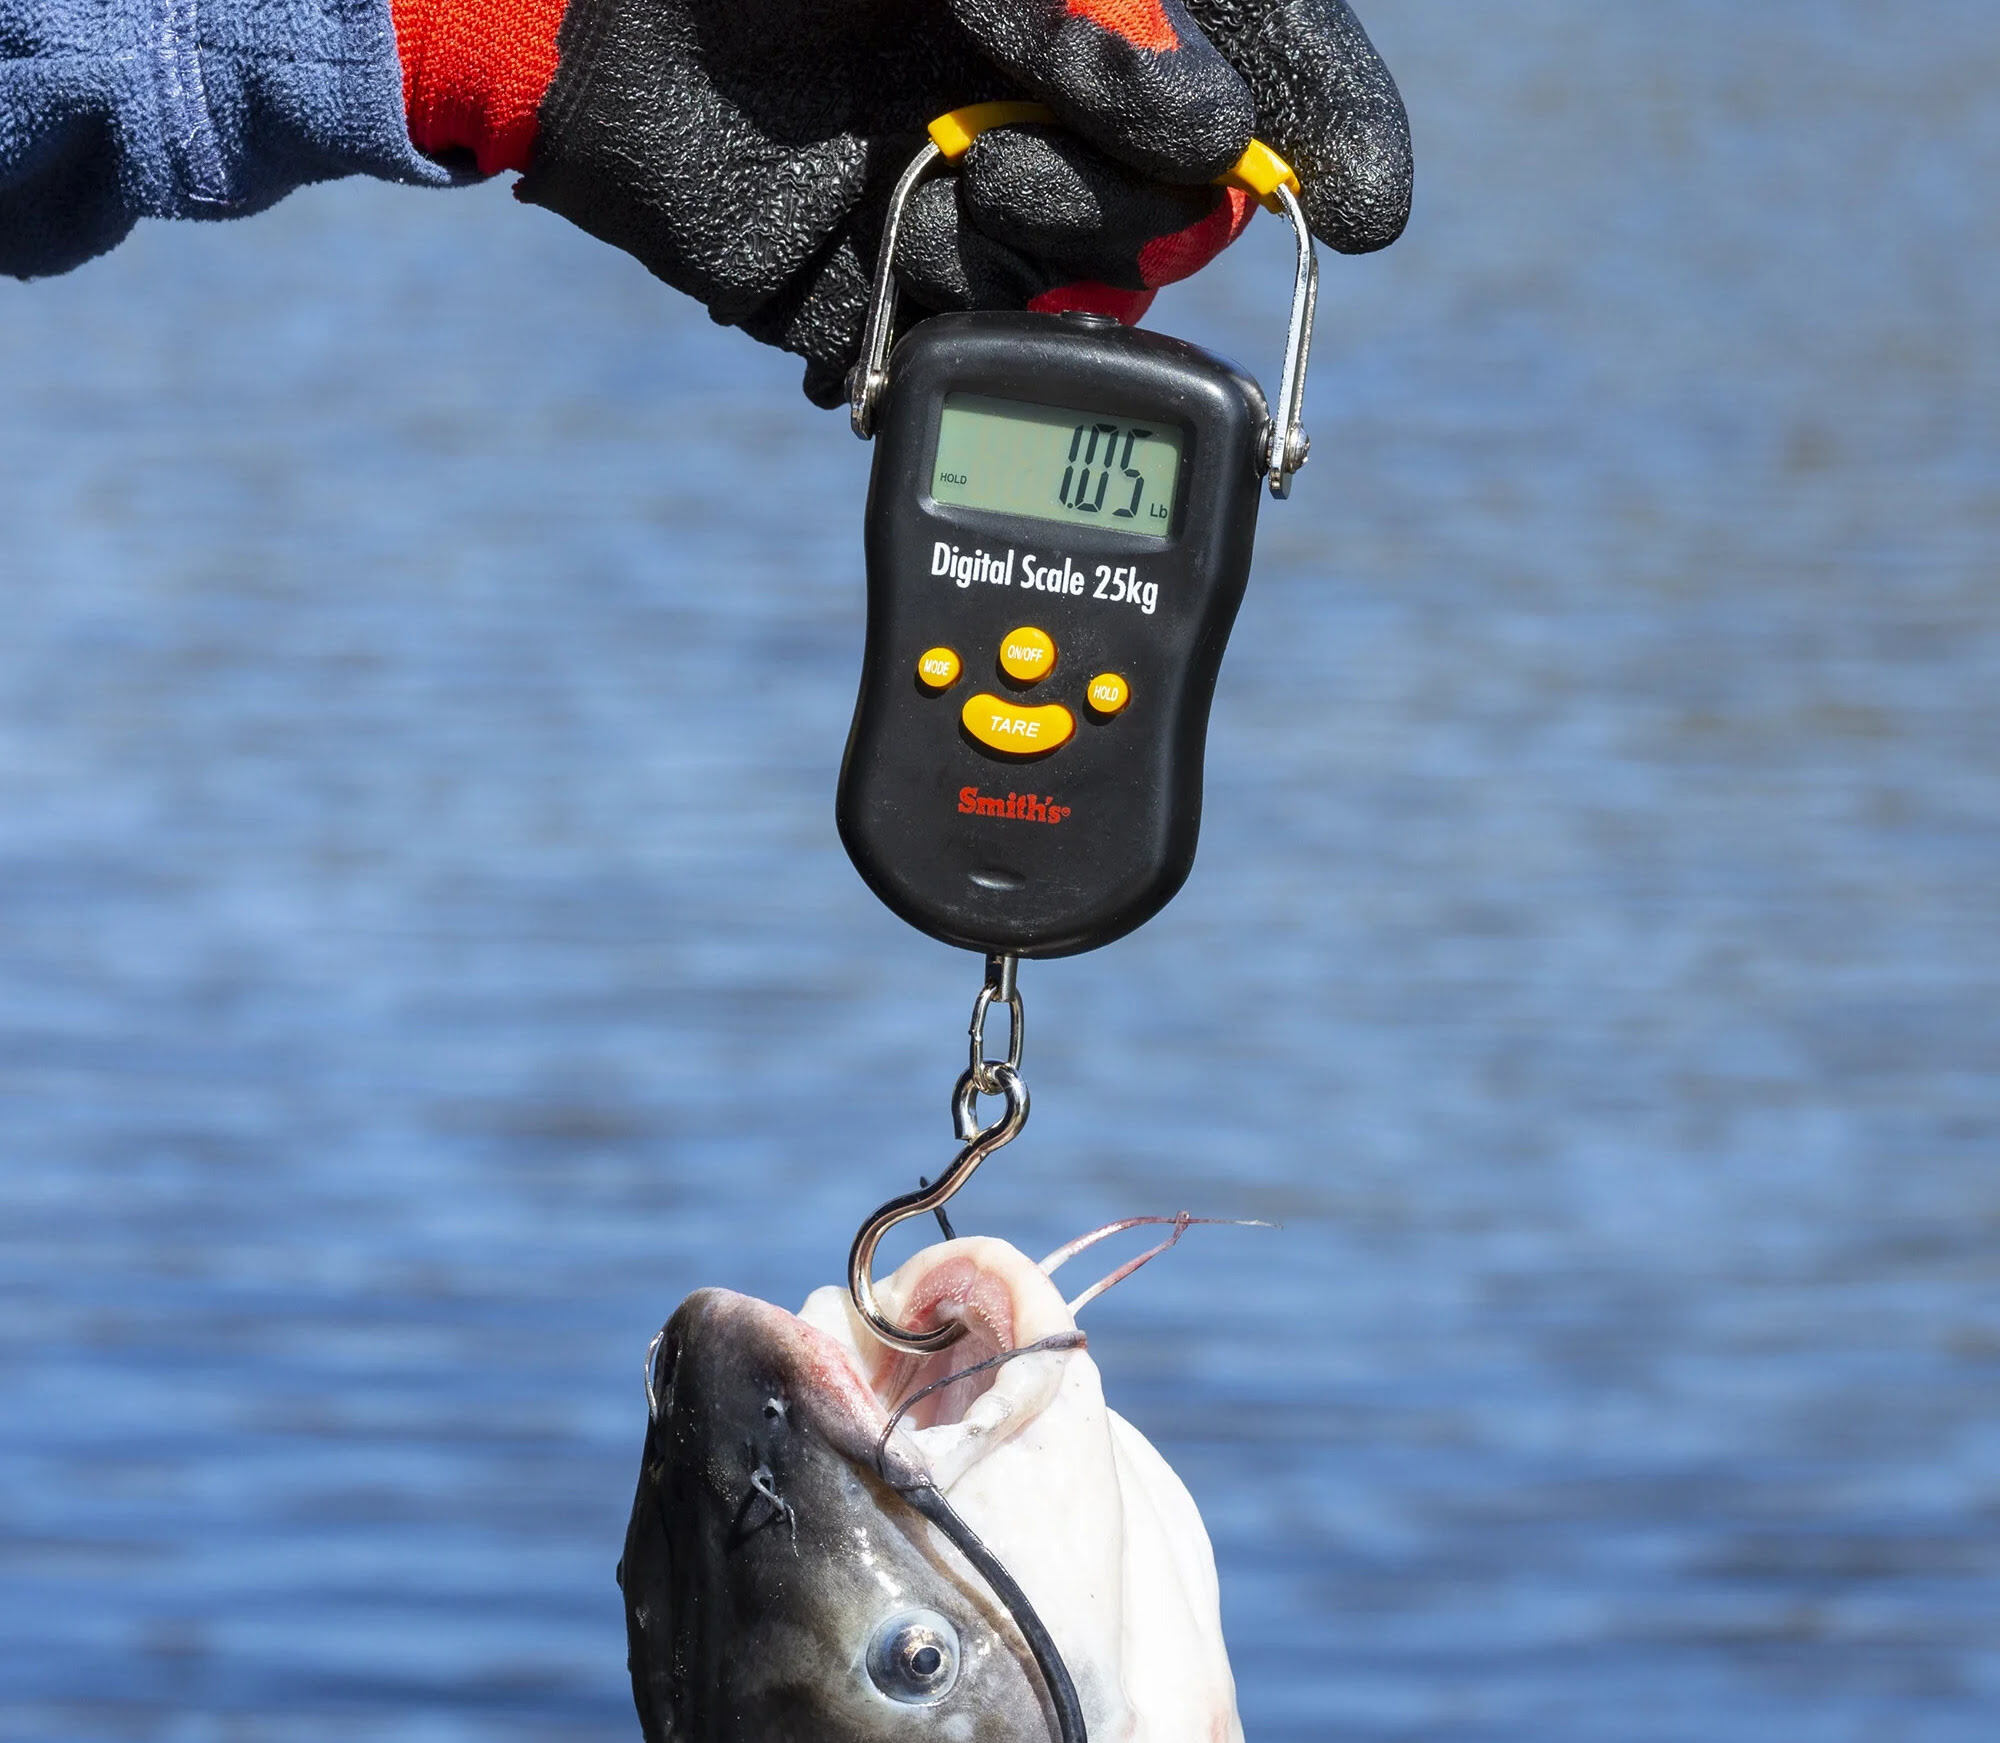 Review: Electronic Fish Scale - Accurate and Convenient